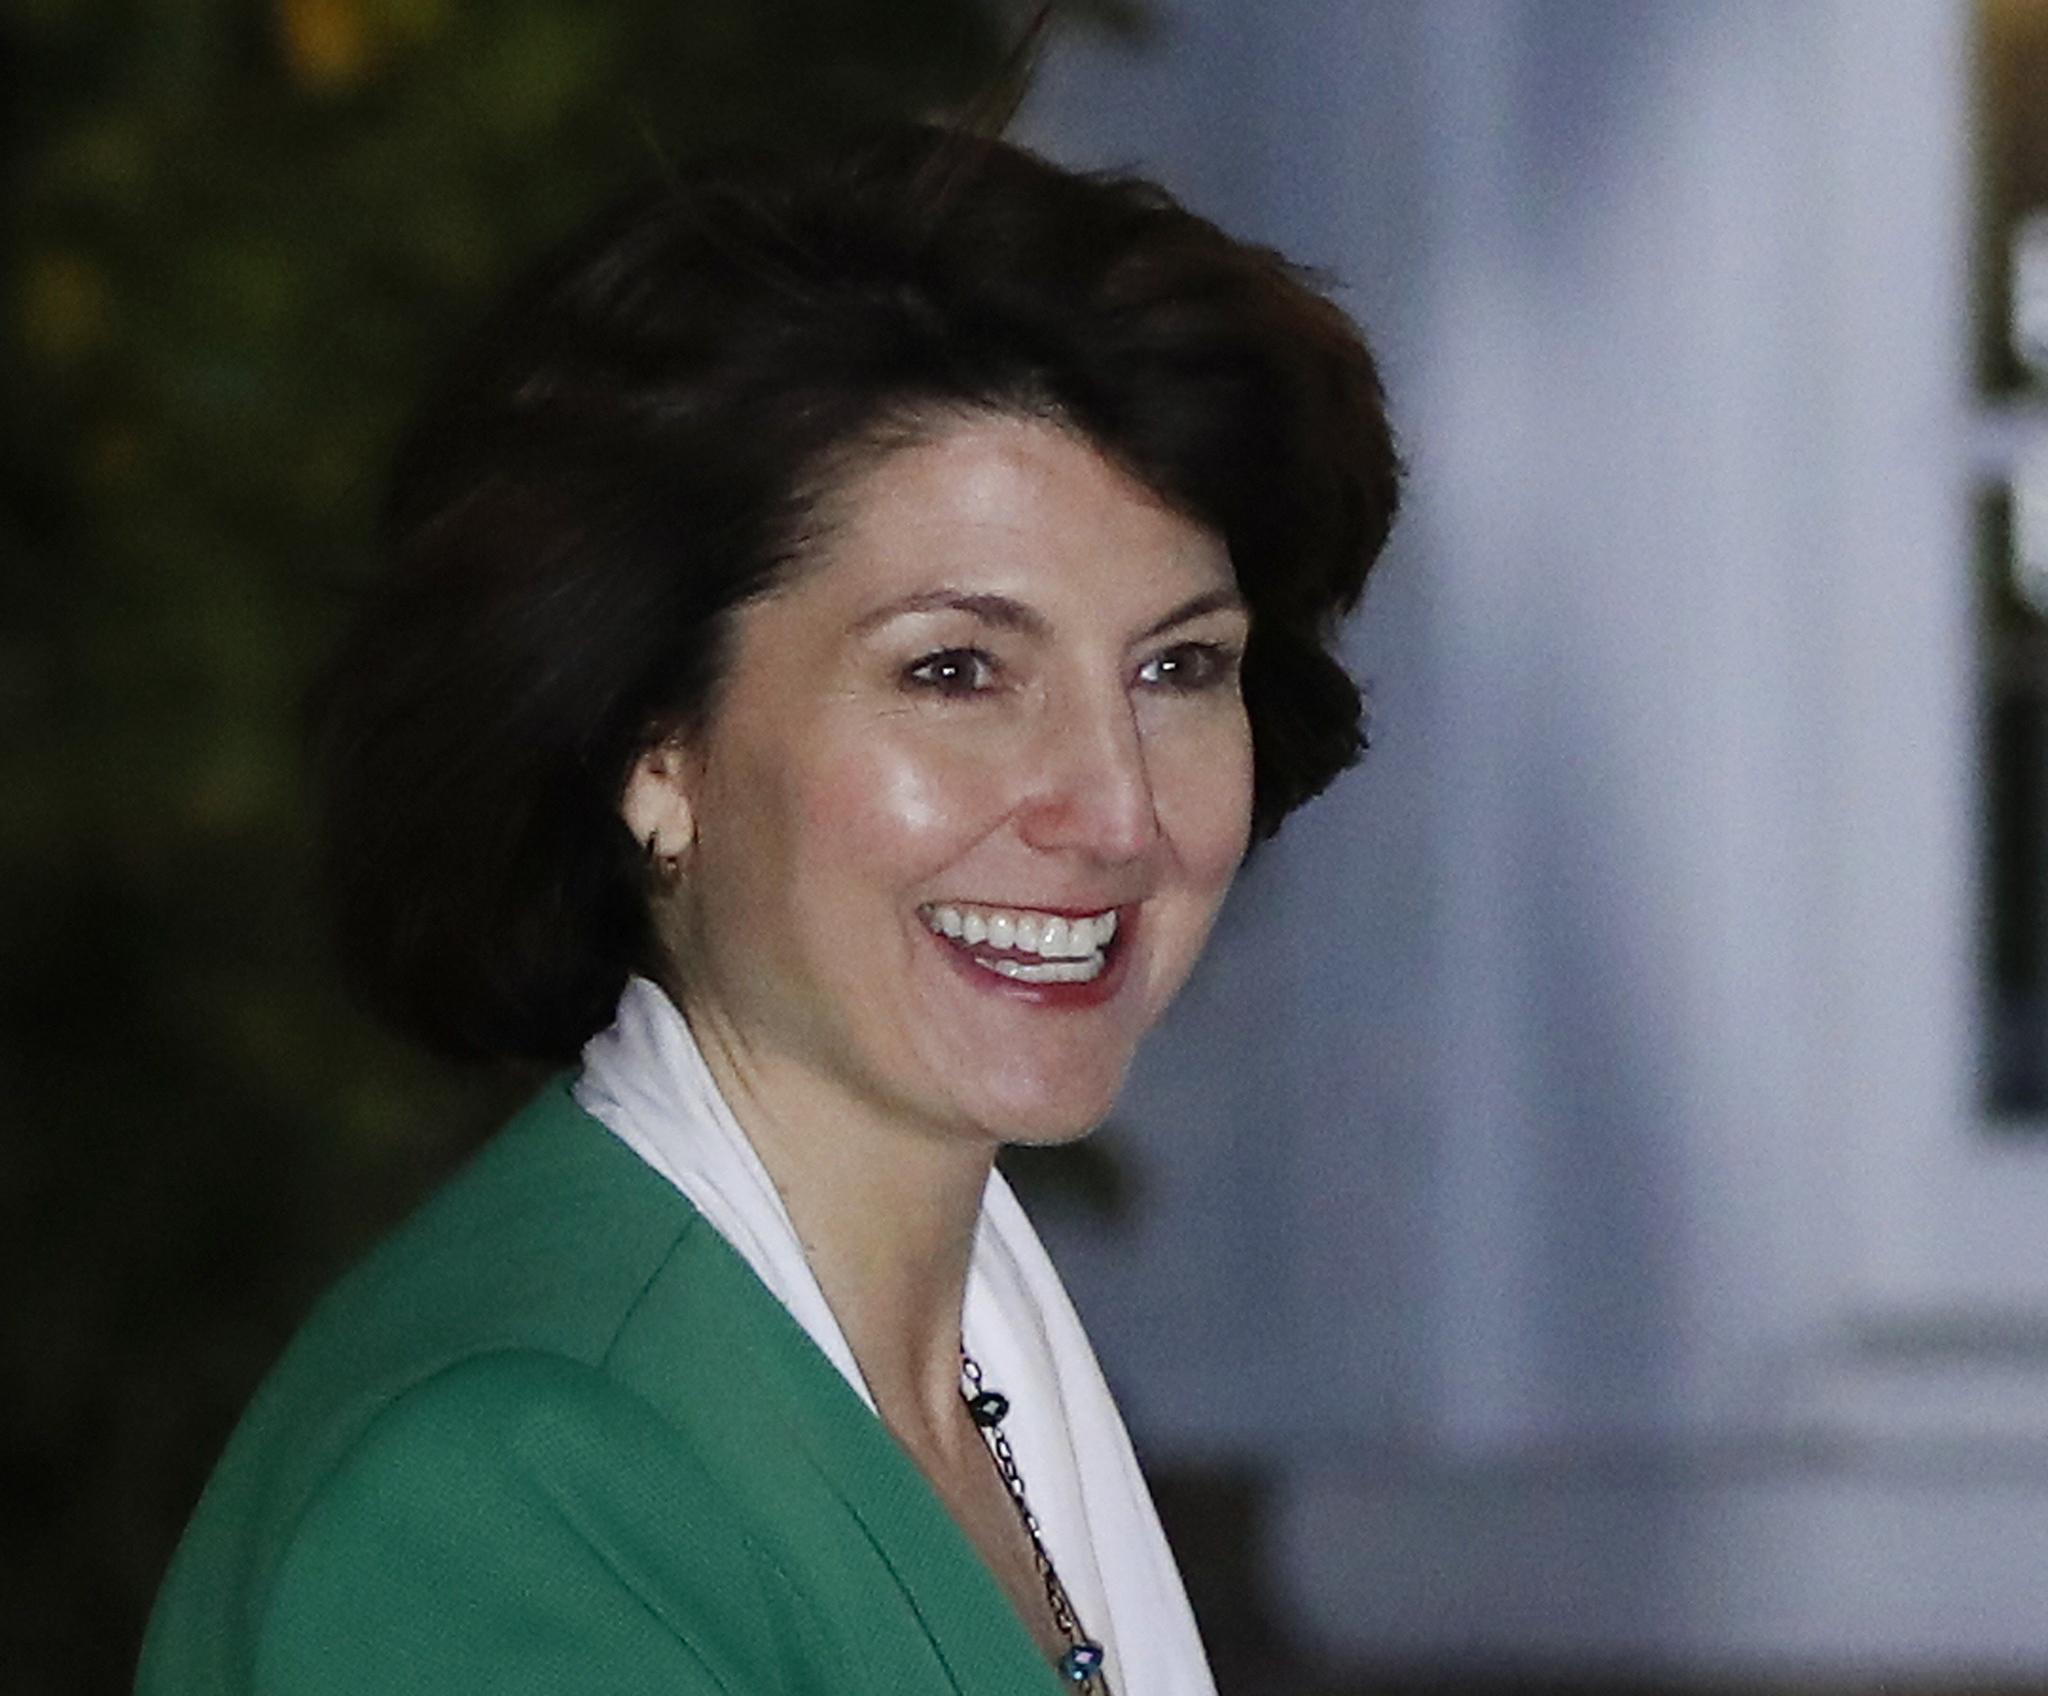 In this Nov. 20 photo, Rep. Cathy McMorris Rodgers, R-Wash., arrives at the Trump National Golf Club Bedminster clubhouse in Bedminster, N.J., to meet with President-elect Donald Trump. (Carolyn Kaster/The Associated Press)